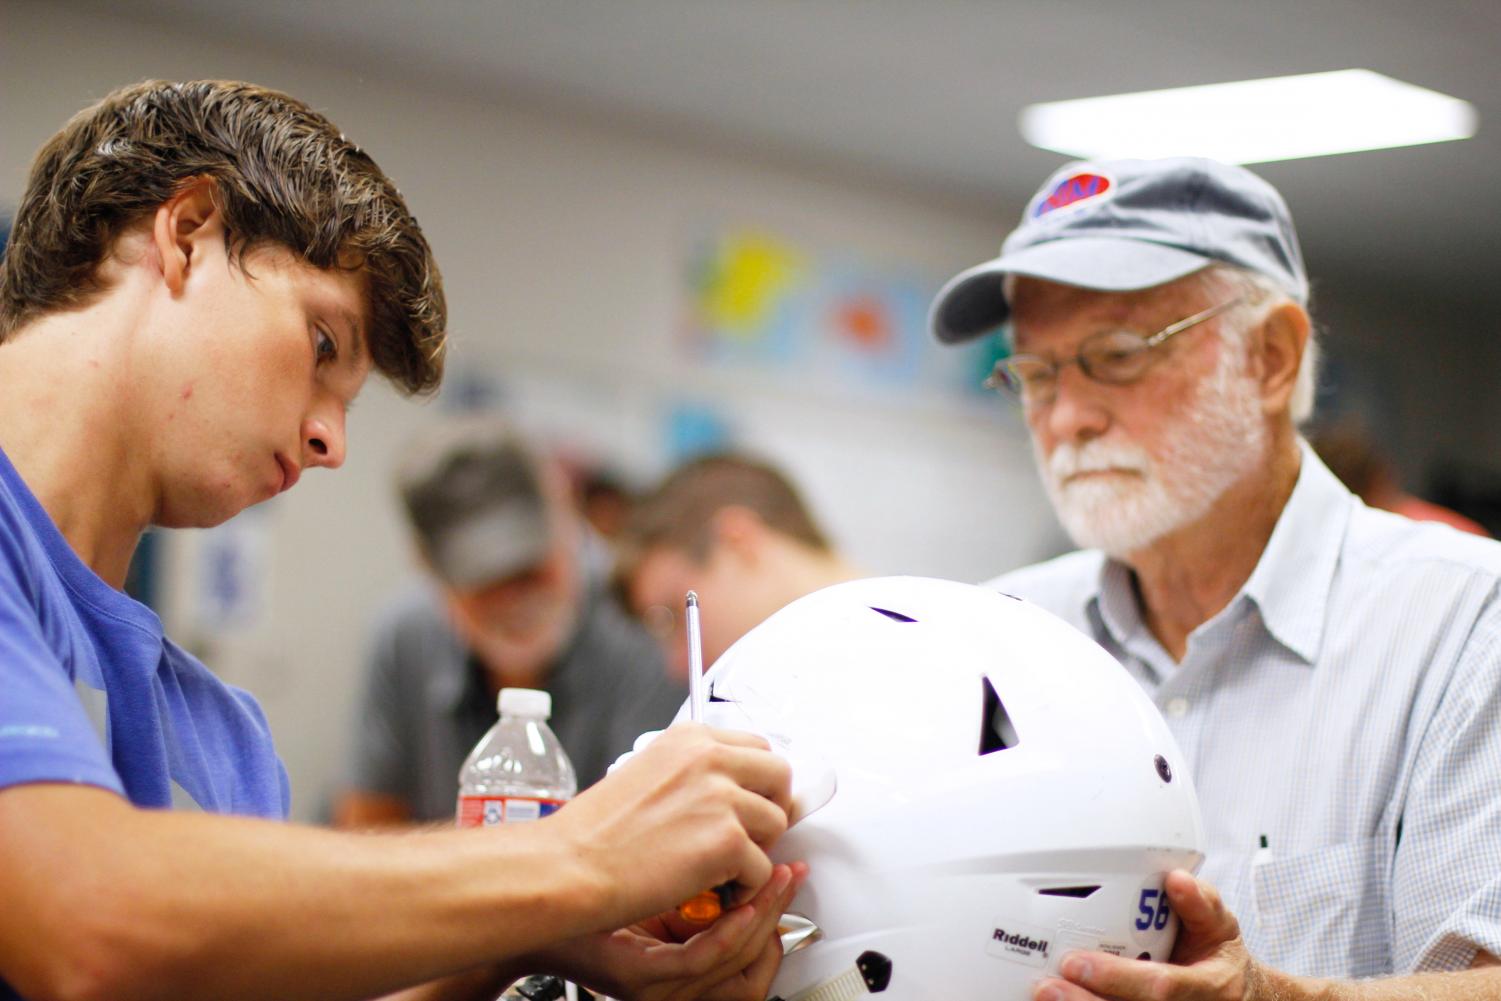 Senior Copeland Taylor and his grandfather place the EAGLES decal on his helmet. This event was started last year as a way to strengthen bonds with the community.